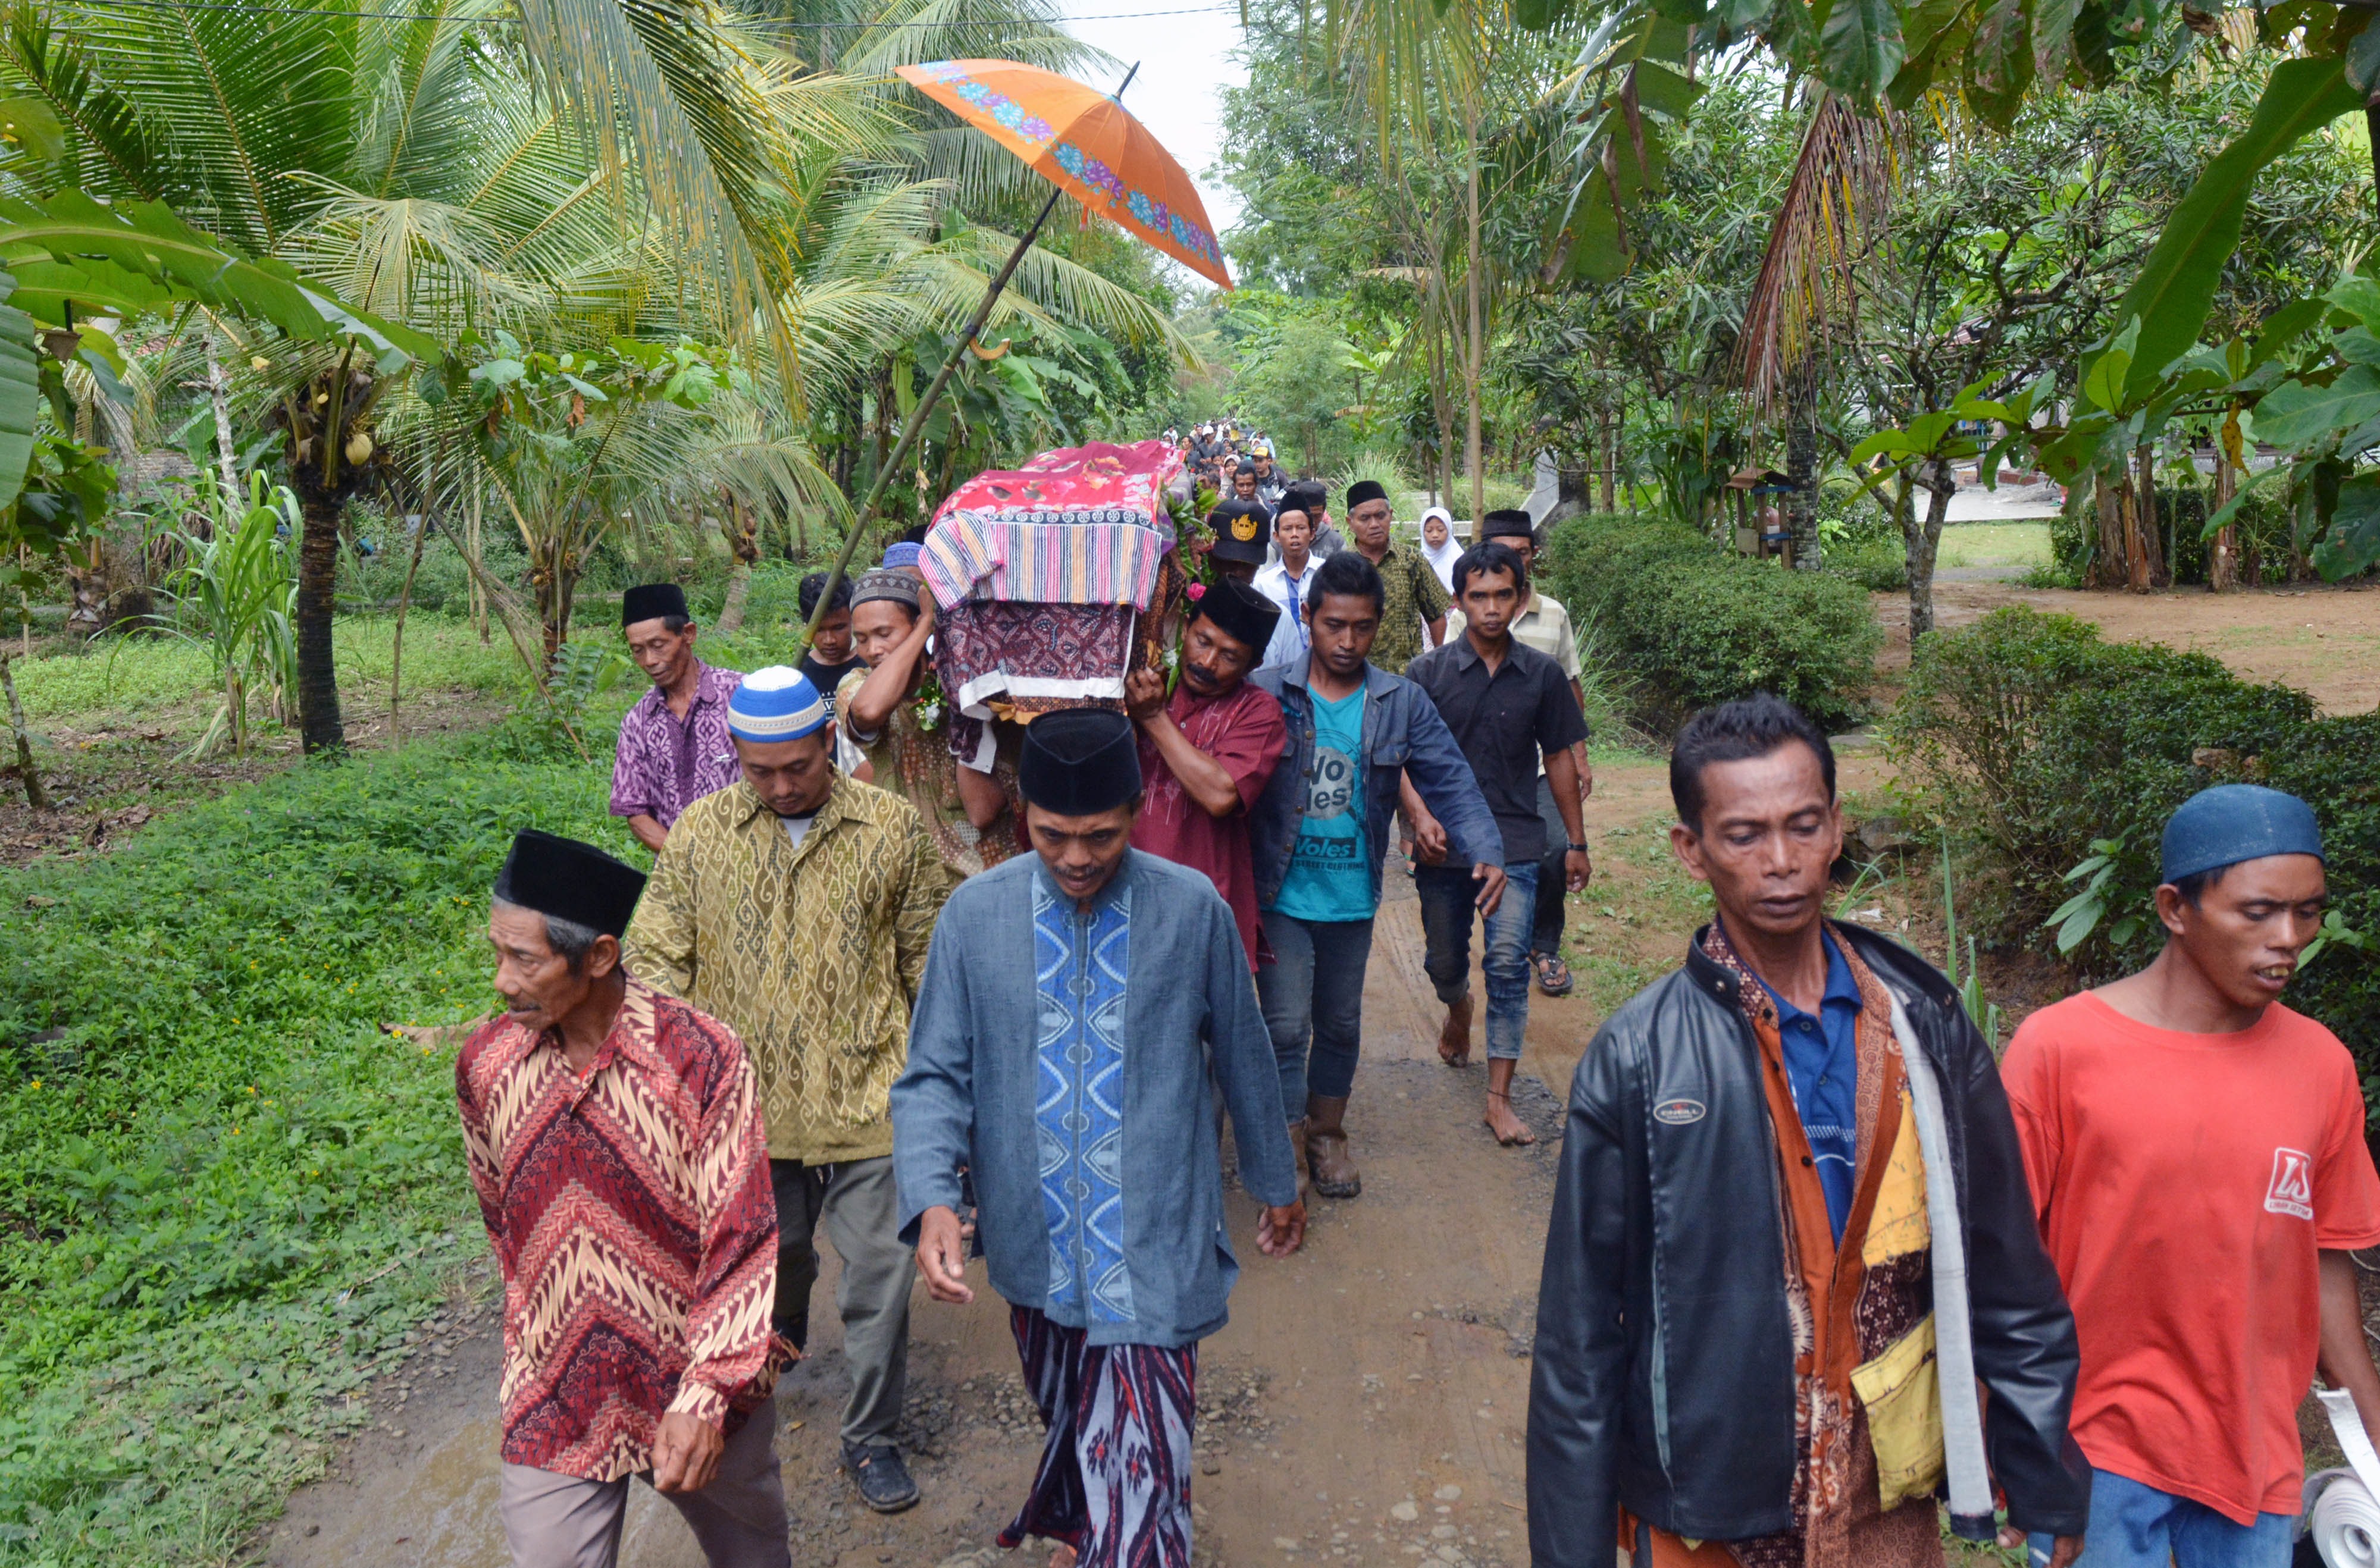 Relatives and villagers carry the coffin of Sumarti Ningsih, one of two Indonesian women murdered by British banker Rurik Jutting in Hong Kong, during her funeral at Gandrungmangu village, in Cilacap, Indonesia's Central Java province, on Nov. 12, 2014 (Dida Nuswantara—AFP/Getty Images)